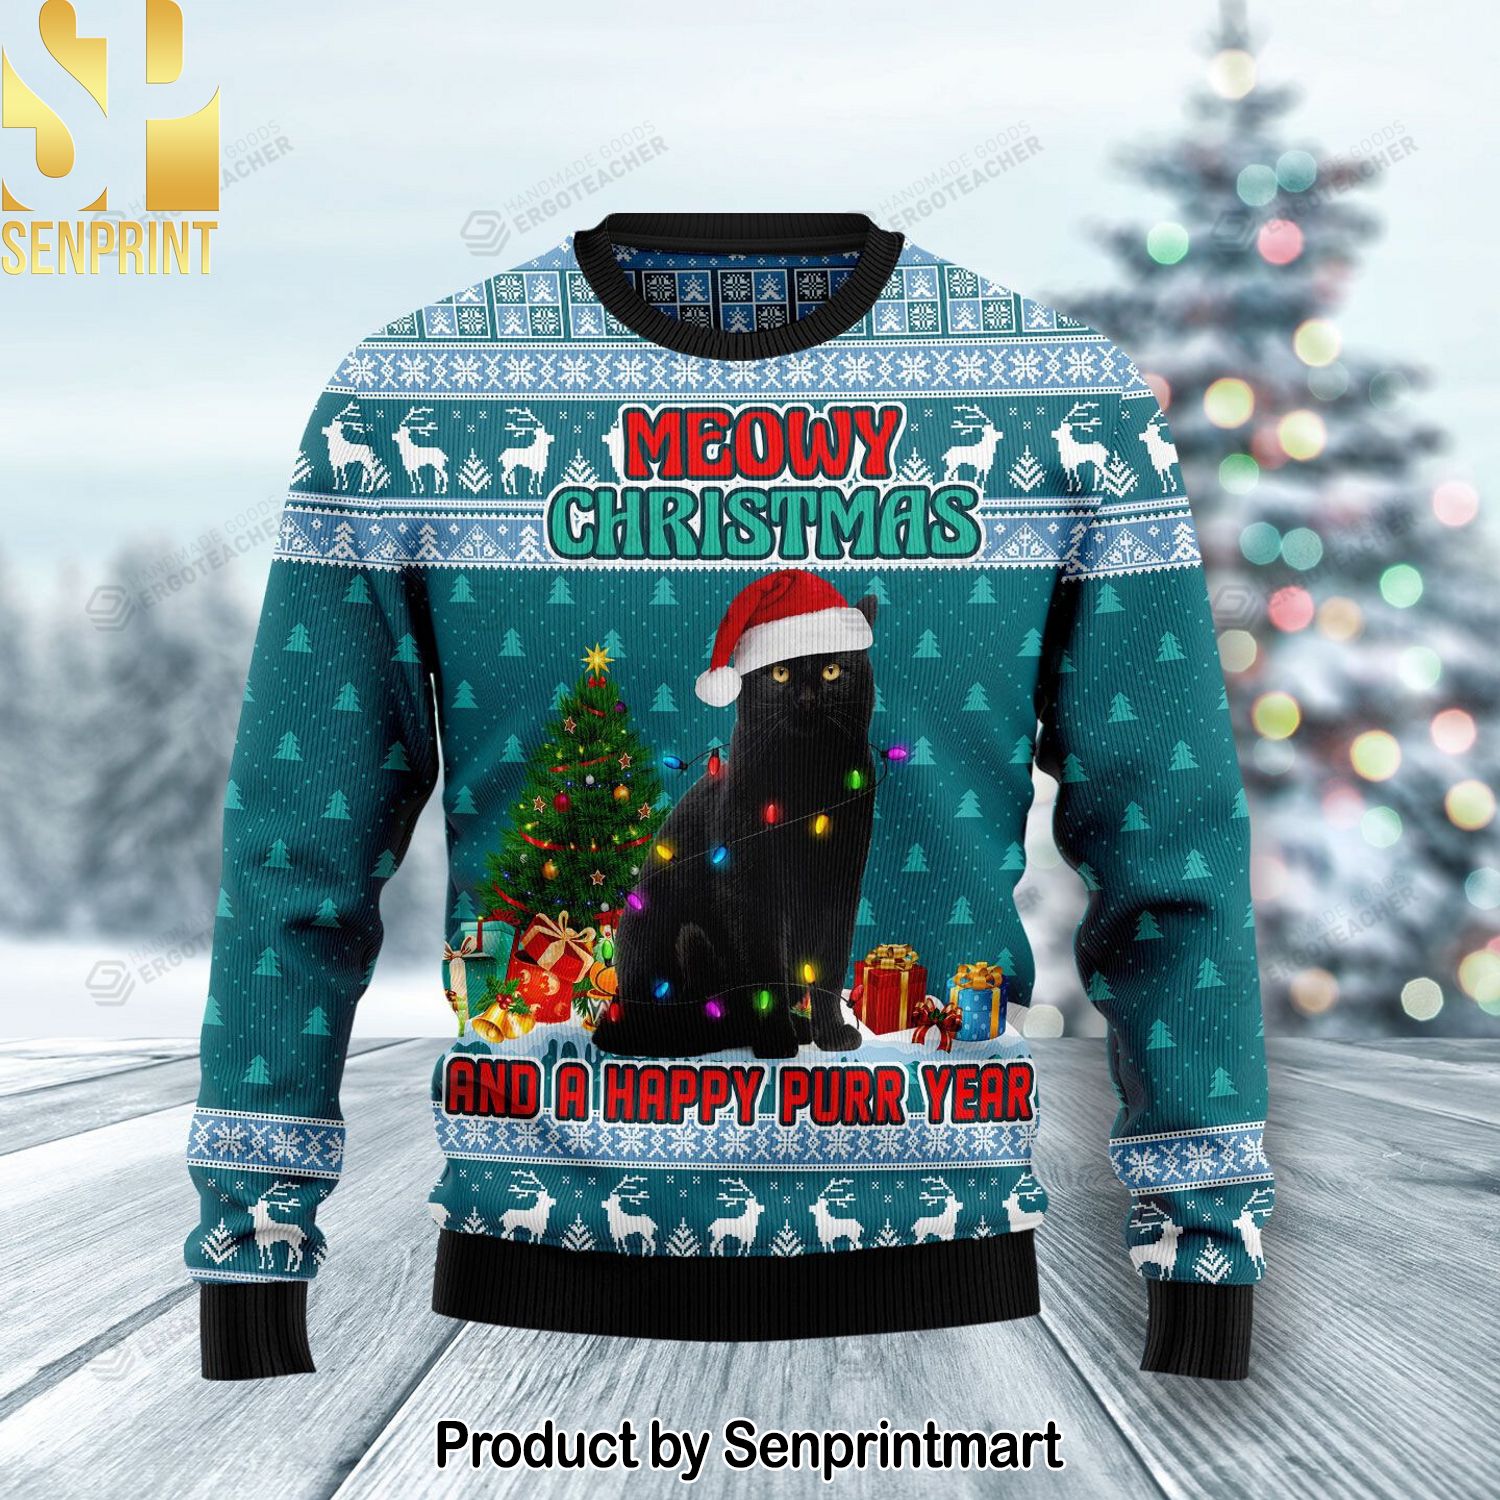 Black Cat Meomy Christmas And A Happy Purr Year Ugly Christmas Sweater